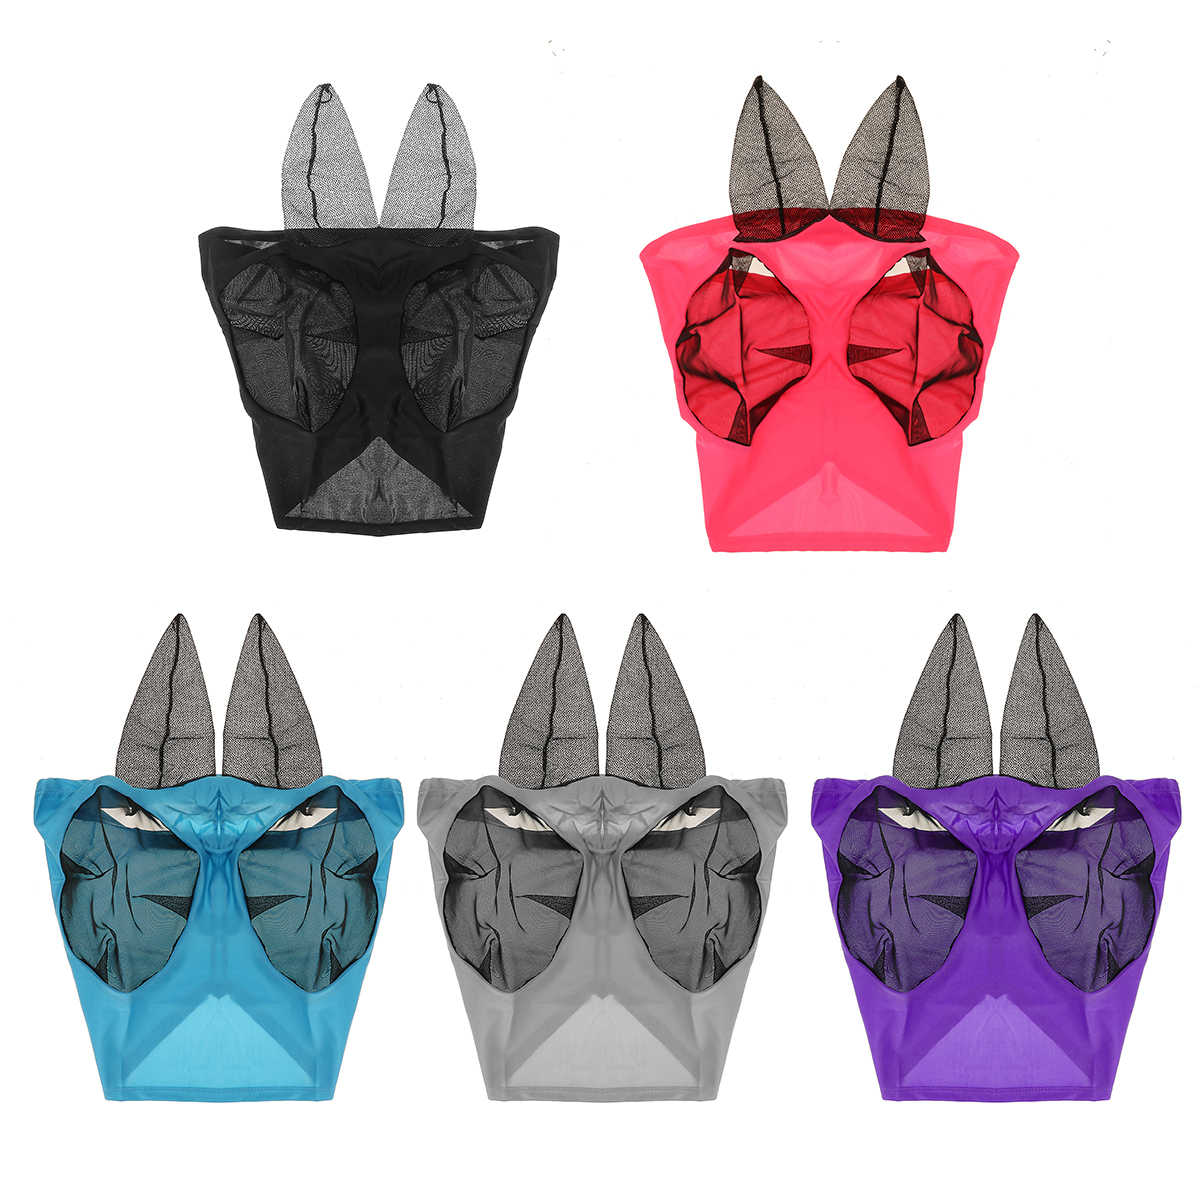 1-Pcs-Anti-Fly-Mesh-Equine-Mask-Eyes-Ears-Protection-Prevent-Insect-Bites-UV-proof-for-Horse-1862500-2